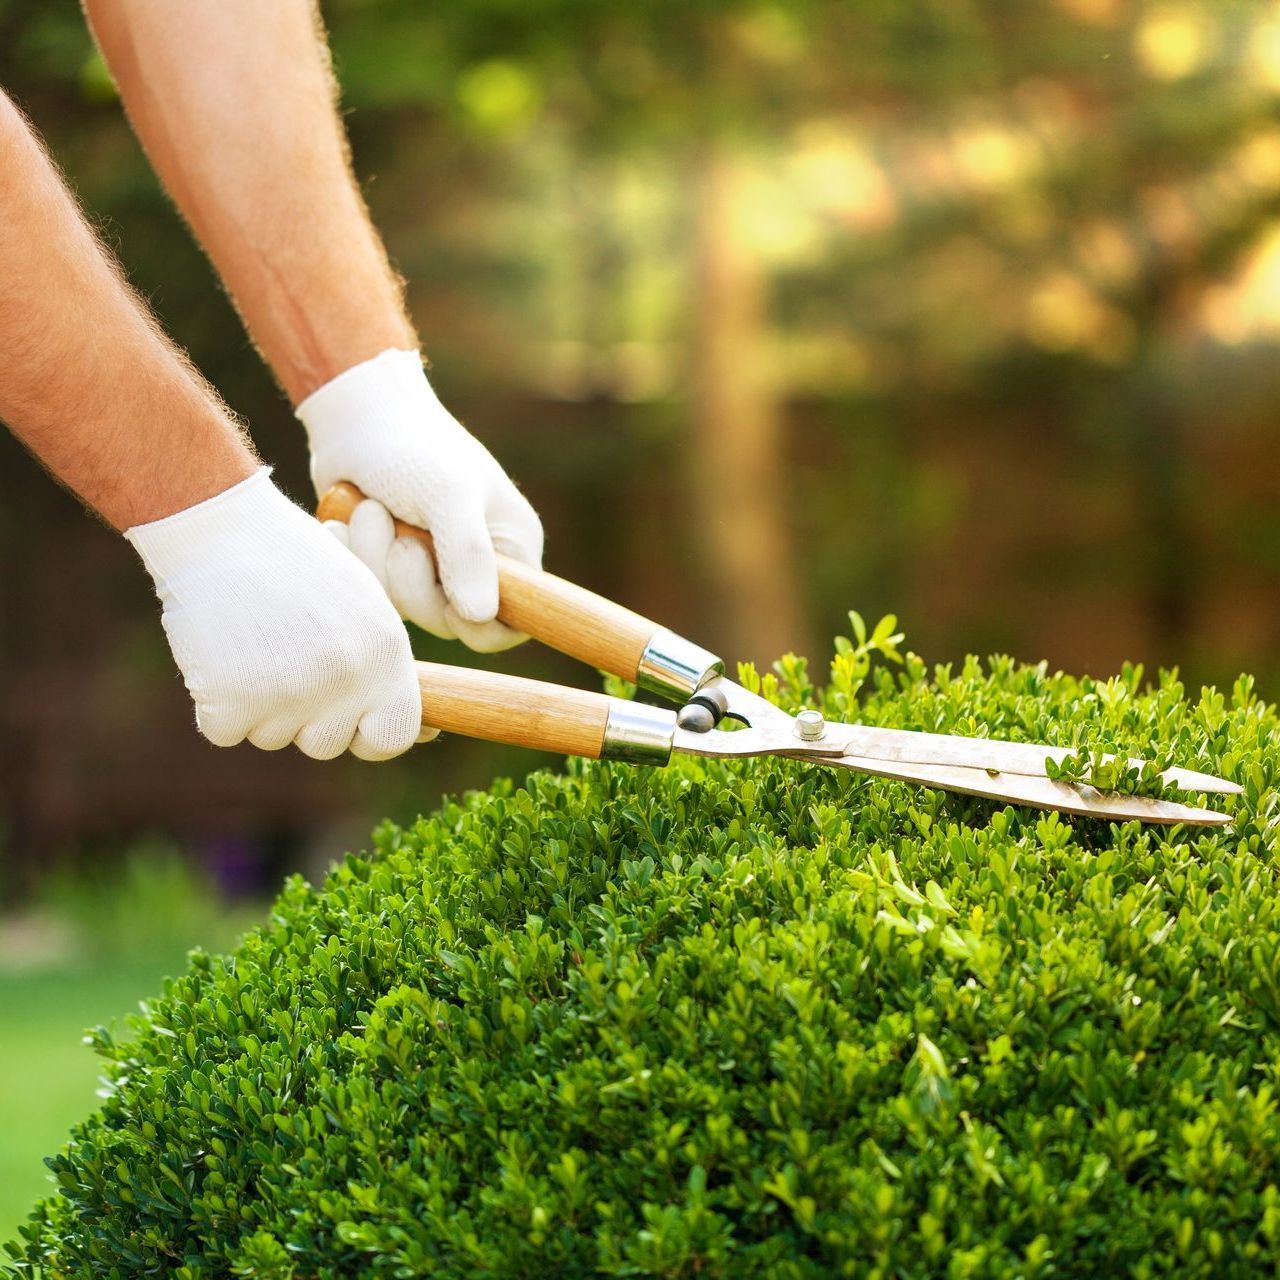 a person is cutting a bush with a pair of scissors